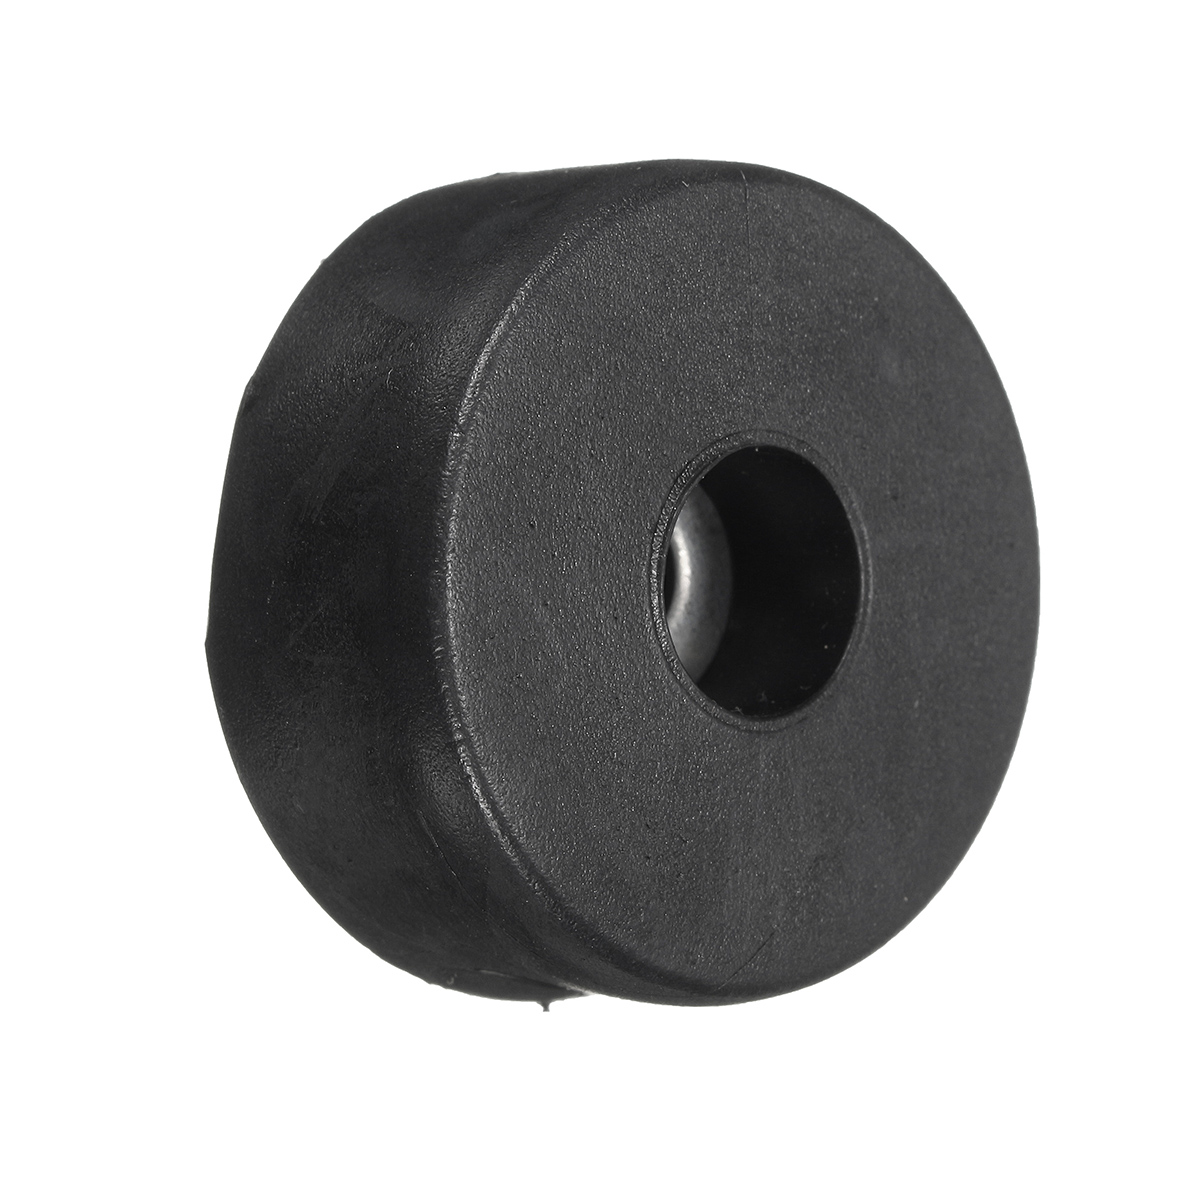 Find 38mm x 15mm Hifi Speaker Cabinets Rubber Feet Bumpers Damper Pad Base Case for Sale on Gipsybee.com with cryptocurrencies